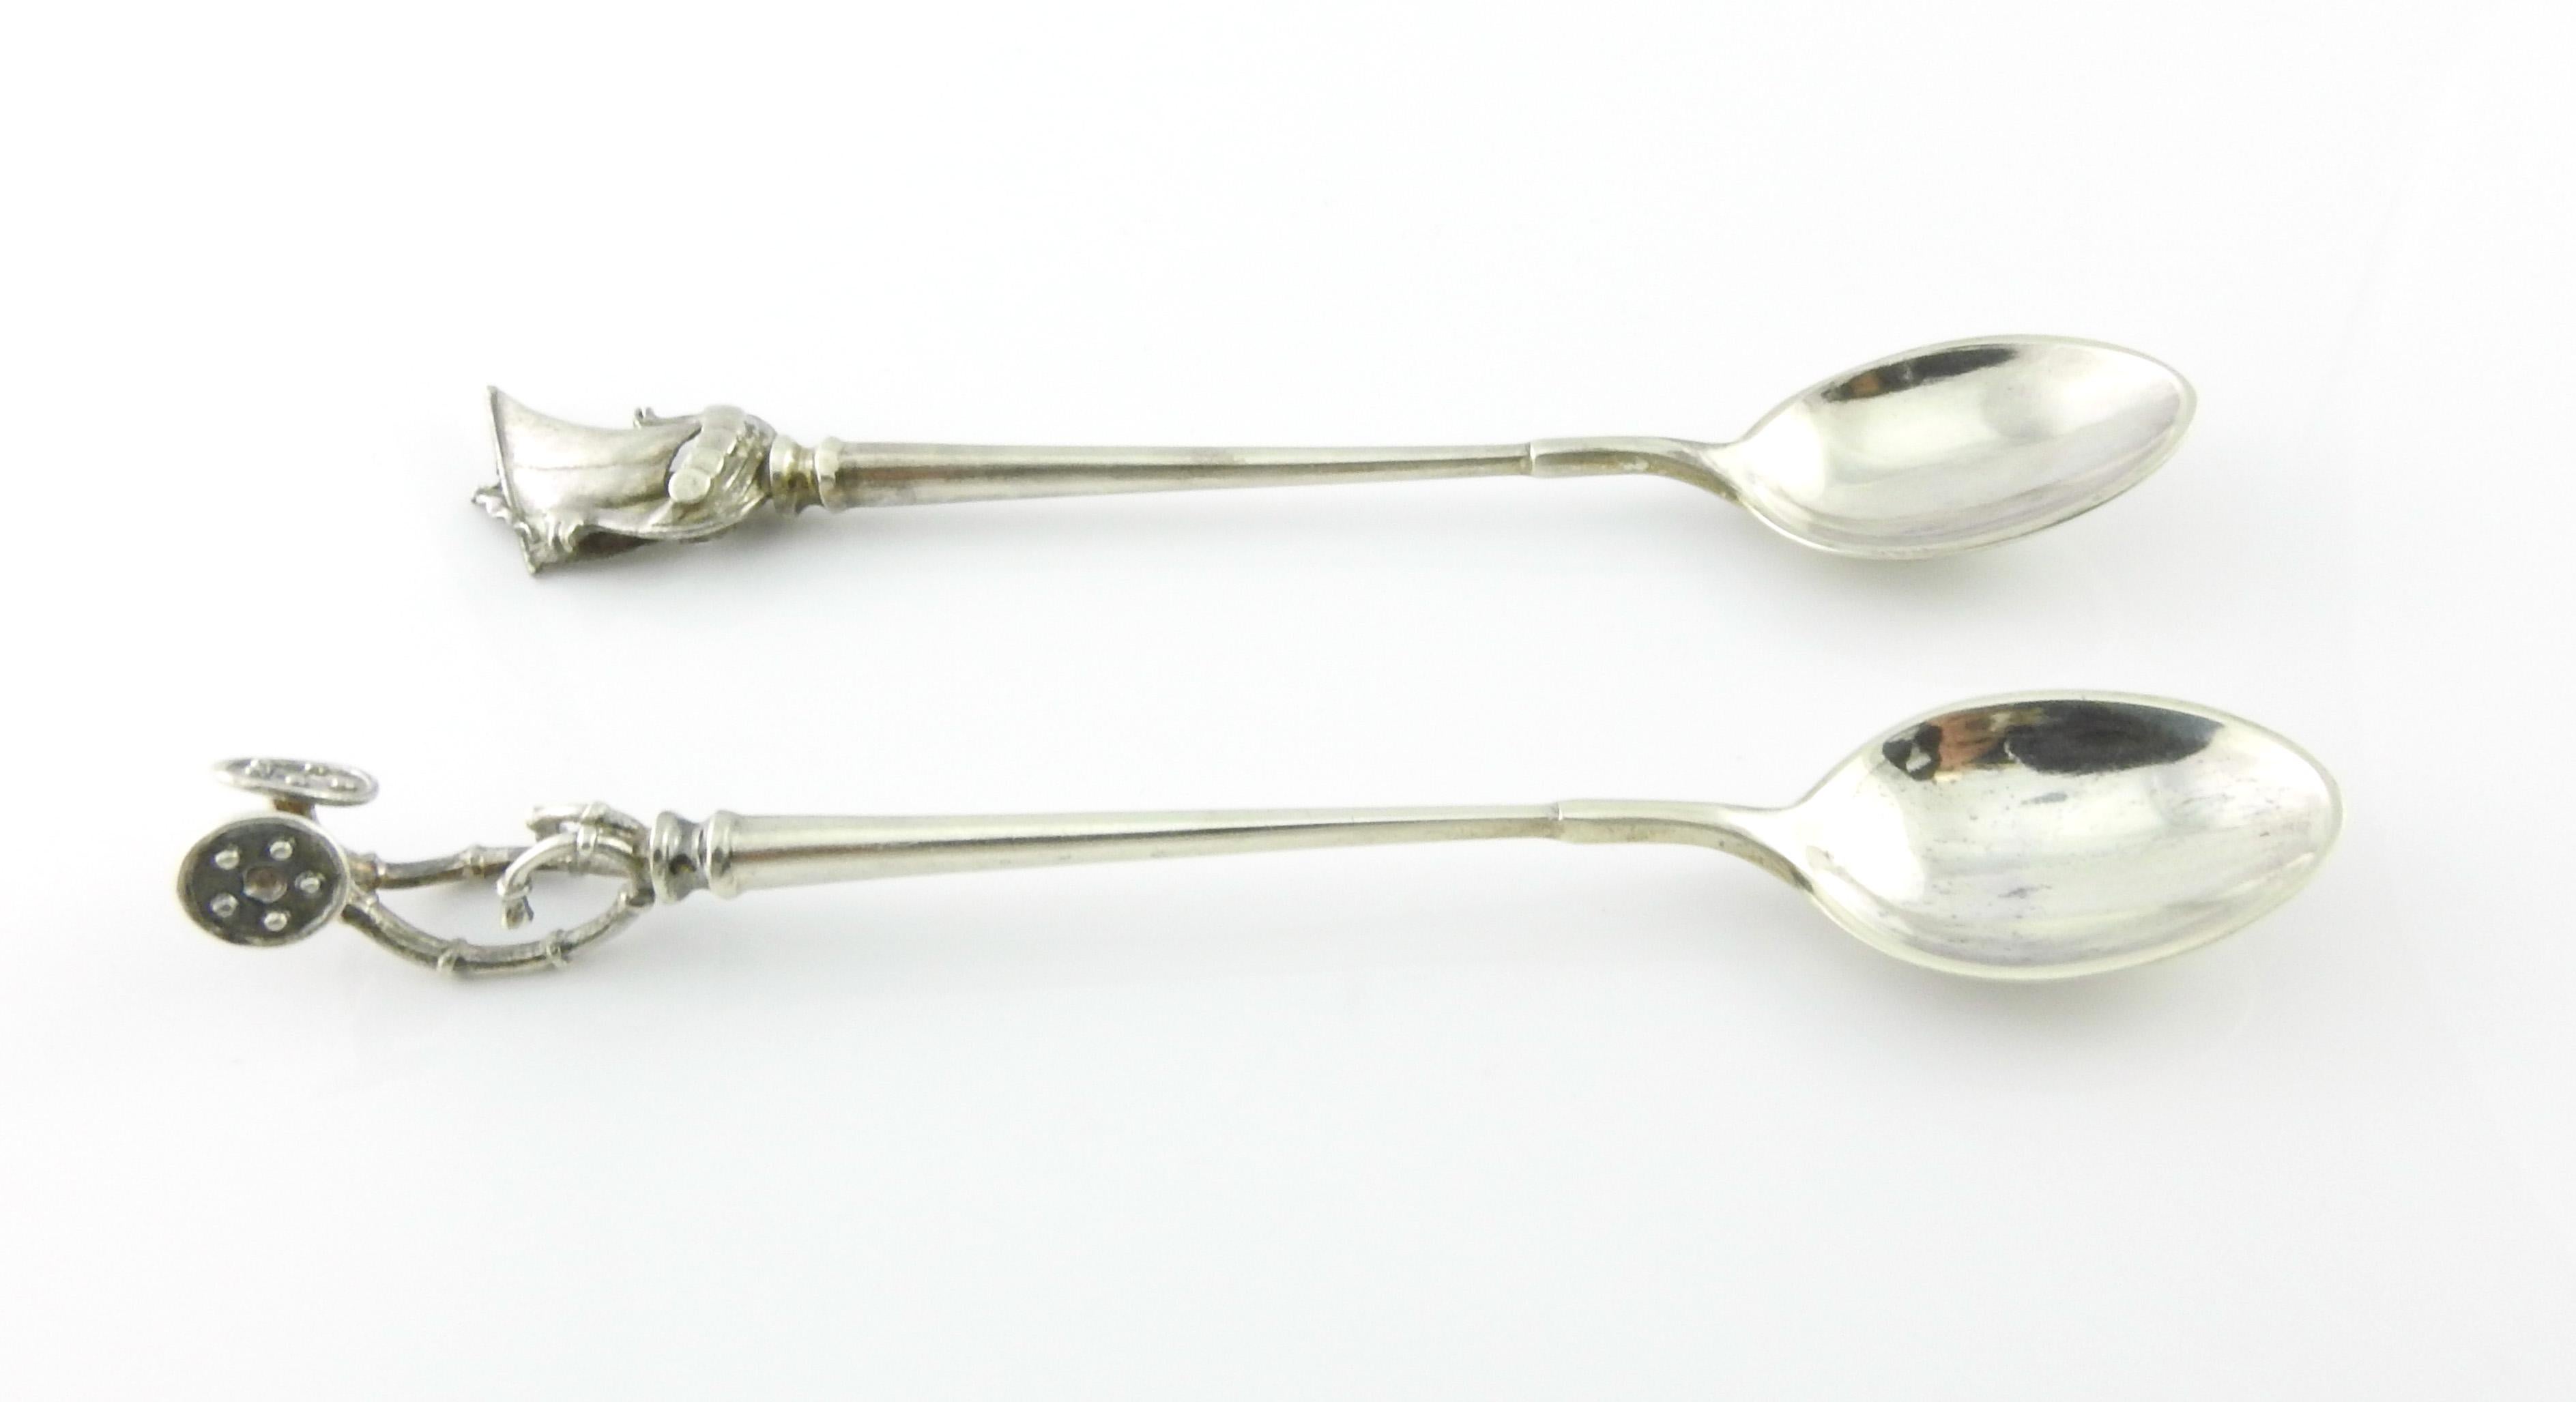 2 Aage Weimer sterling silver Denmark demitasse spoons,
 1 featuring a Viking ship and 1 featuring horns. 
Marked: Aa.W, STERLING DENMARK. 
Measures: 4 3/8